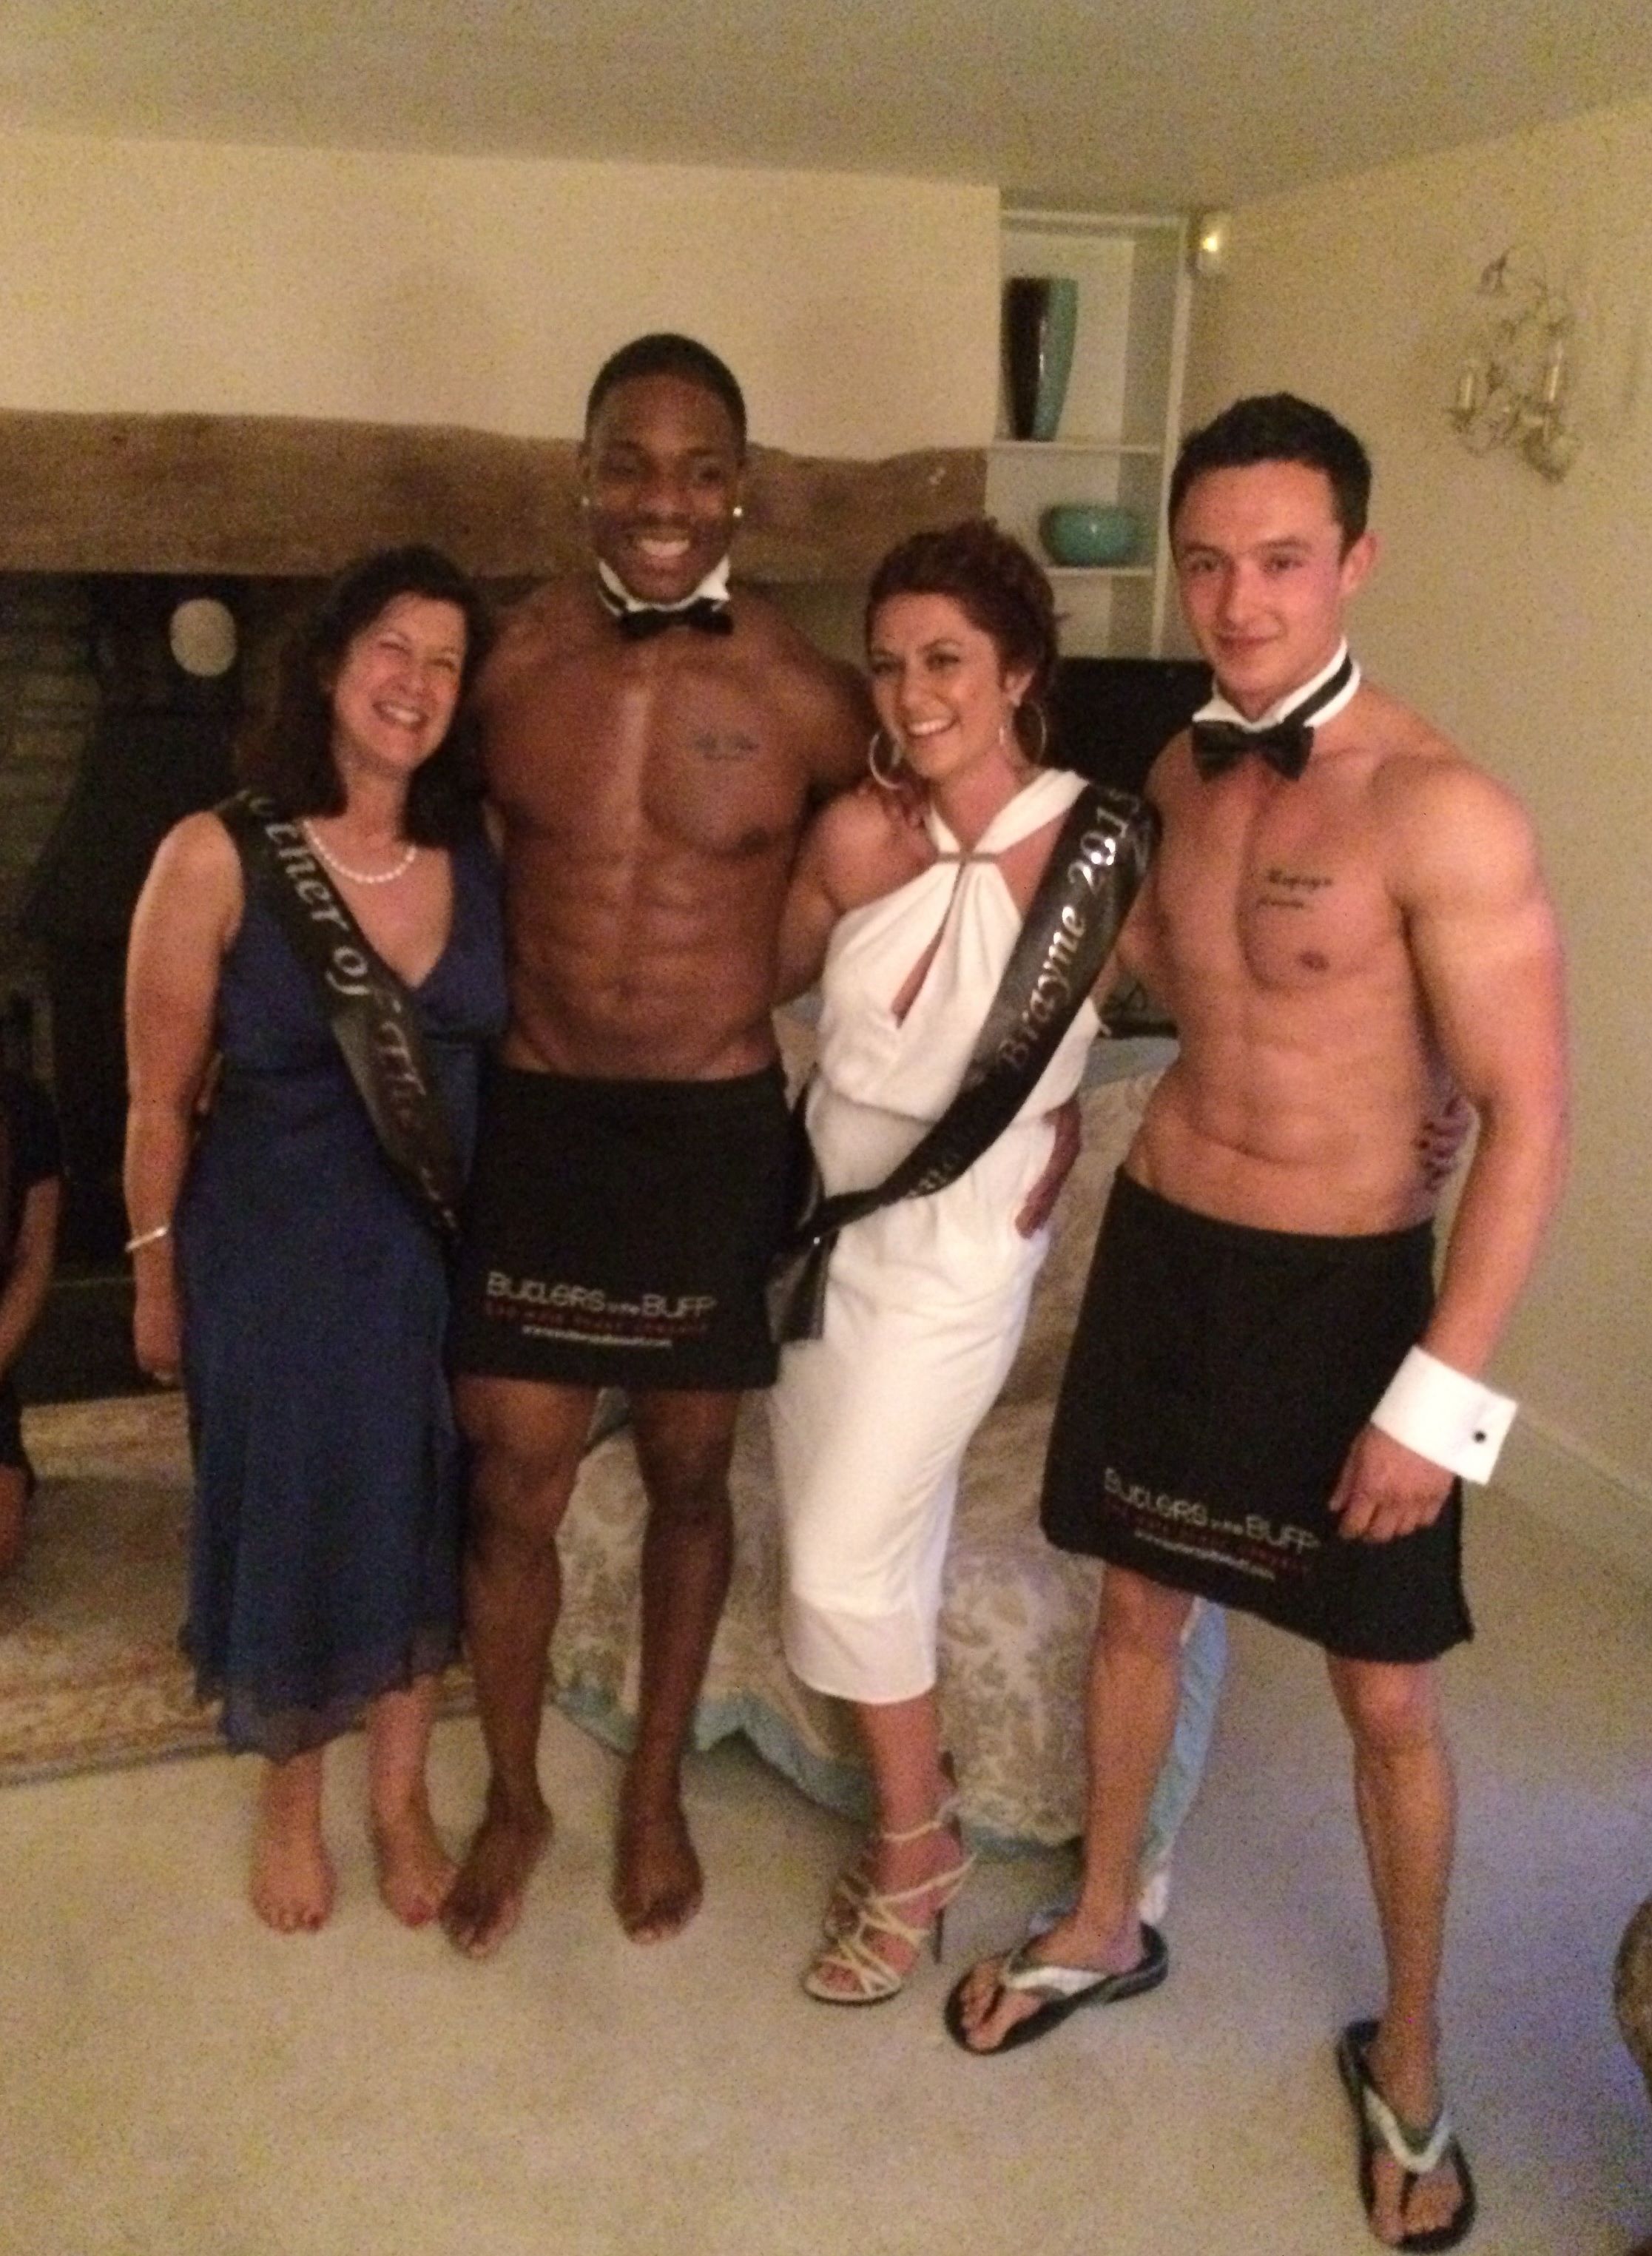 Happy customer: The perfect butlers! The service provided by Butlers ...